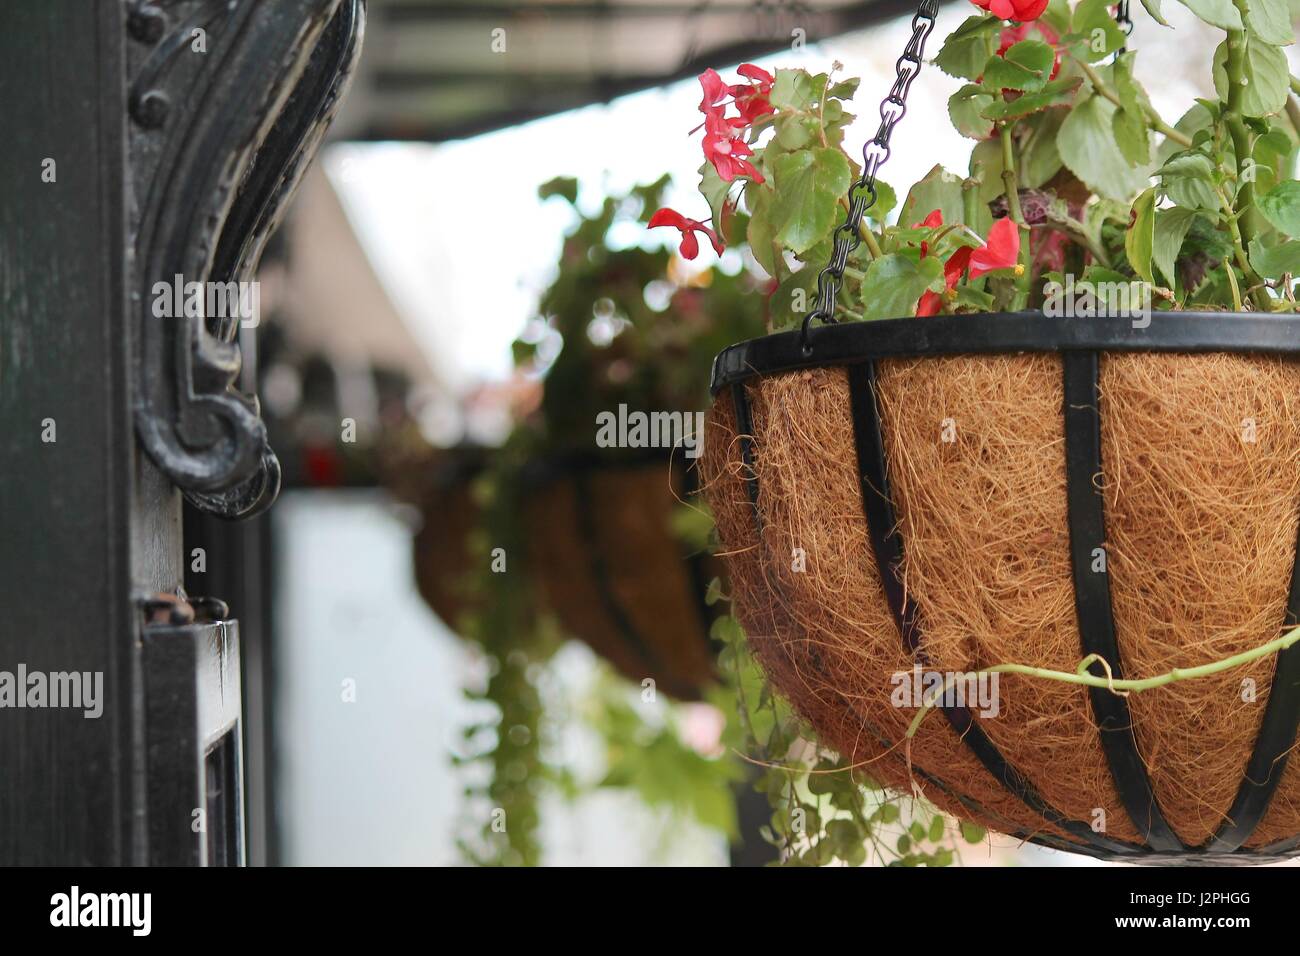 Pink Flowers in basket hanging by cafe Stock Photo